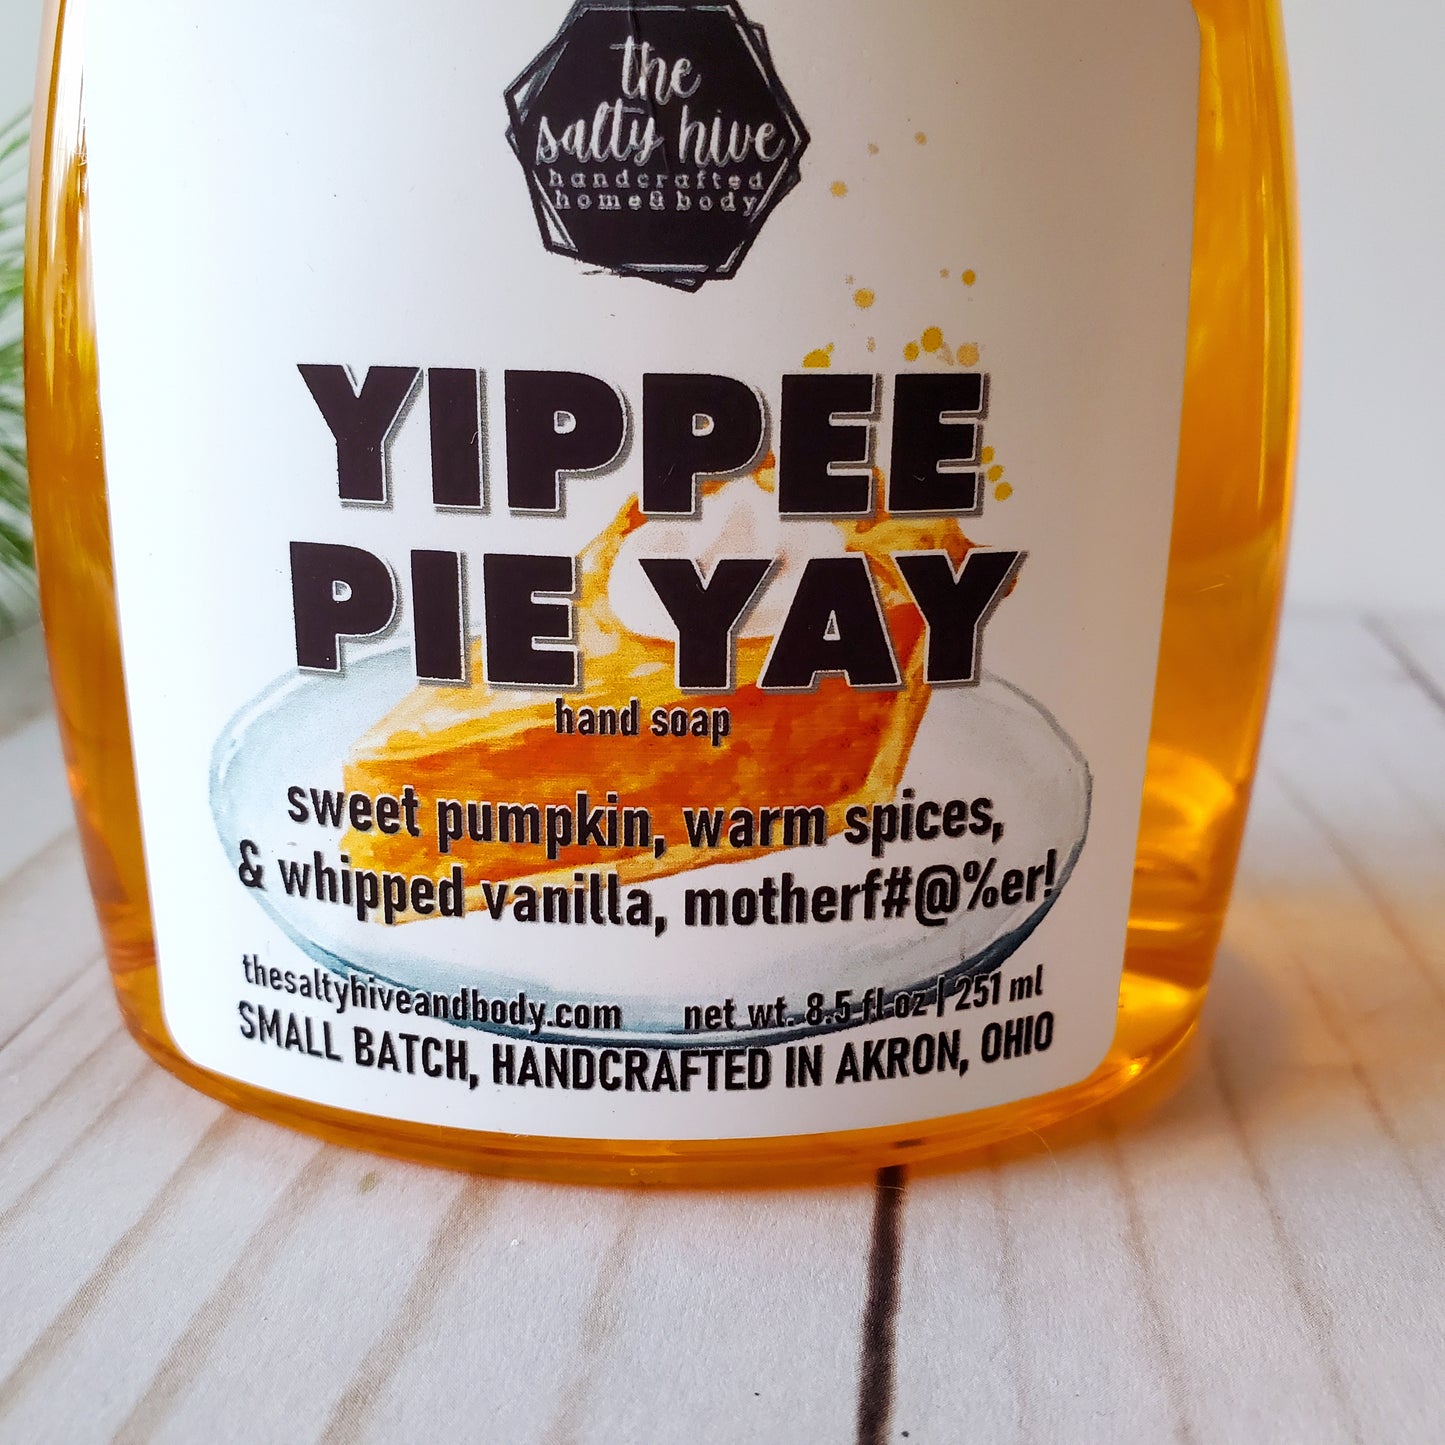 yippee pie yay foaming hand soap - the salty hive